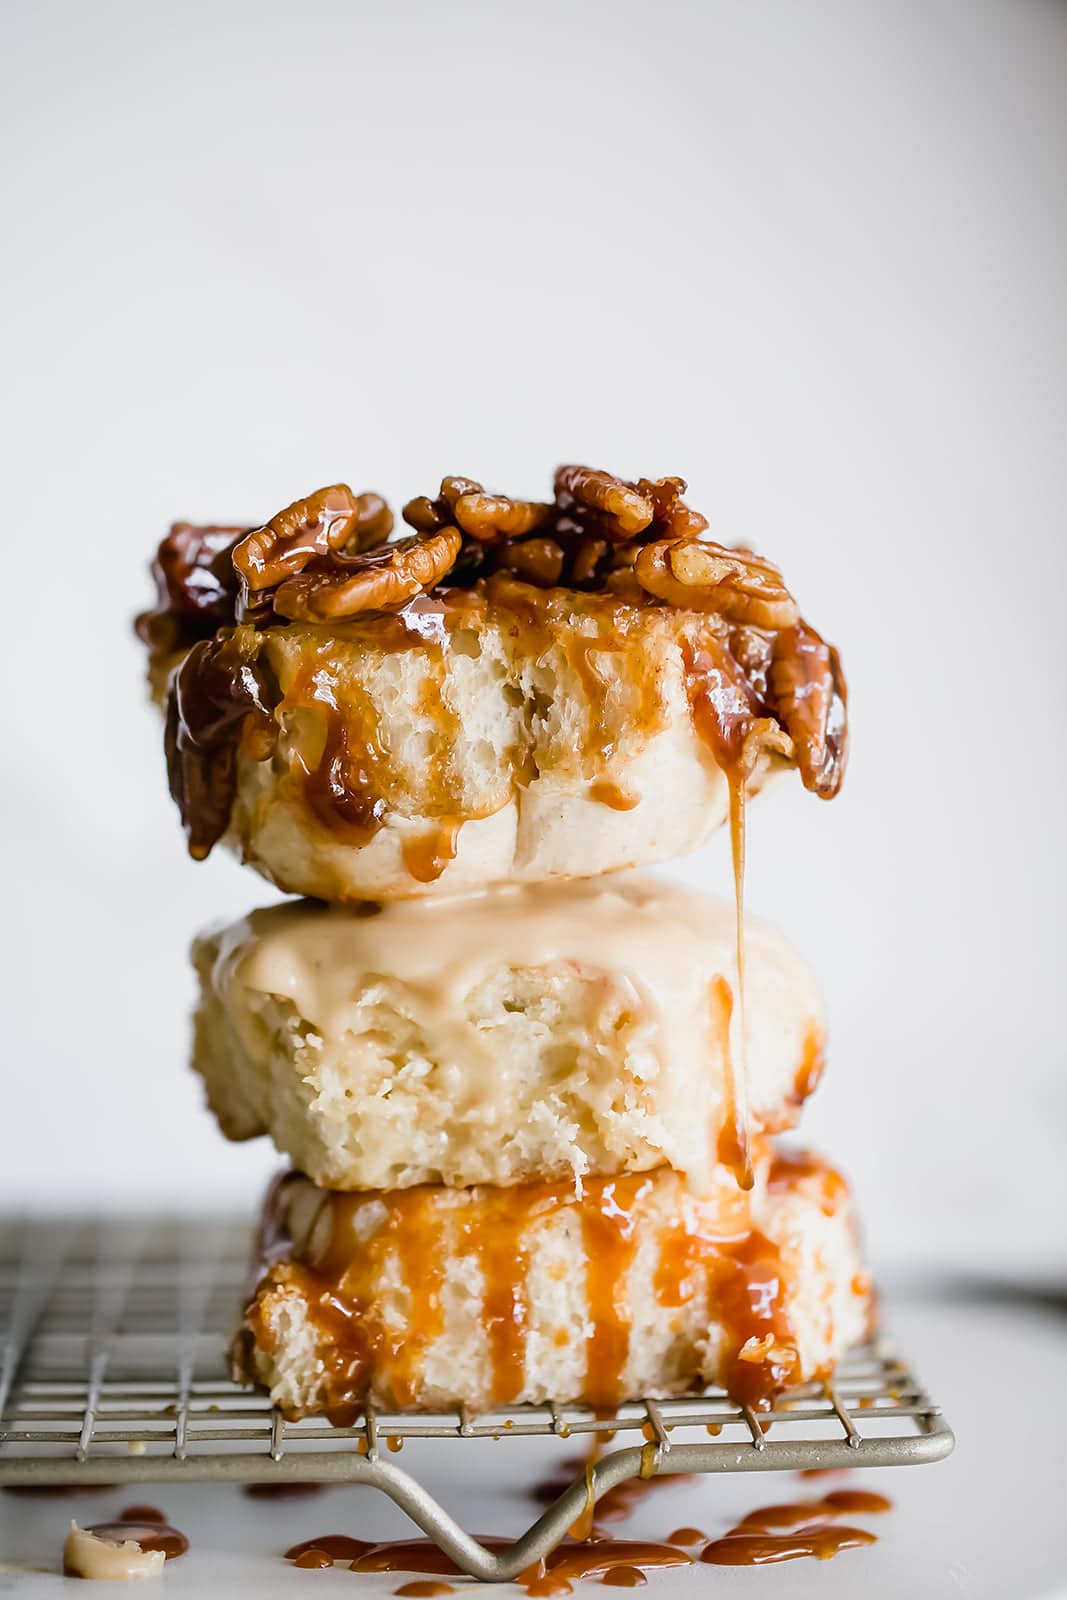 These 3 Easy Cinnamon Roll recipes including caramel apple, banana bread, and sticky pecan are perfect for fall and surprisingly simple to make from scratch!